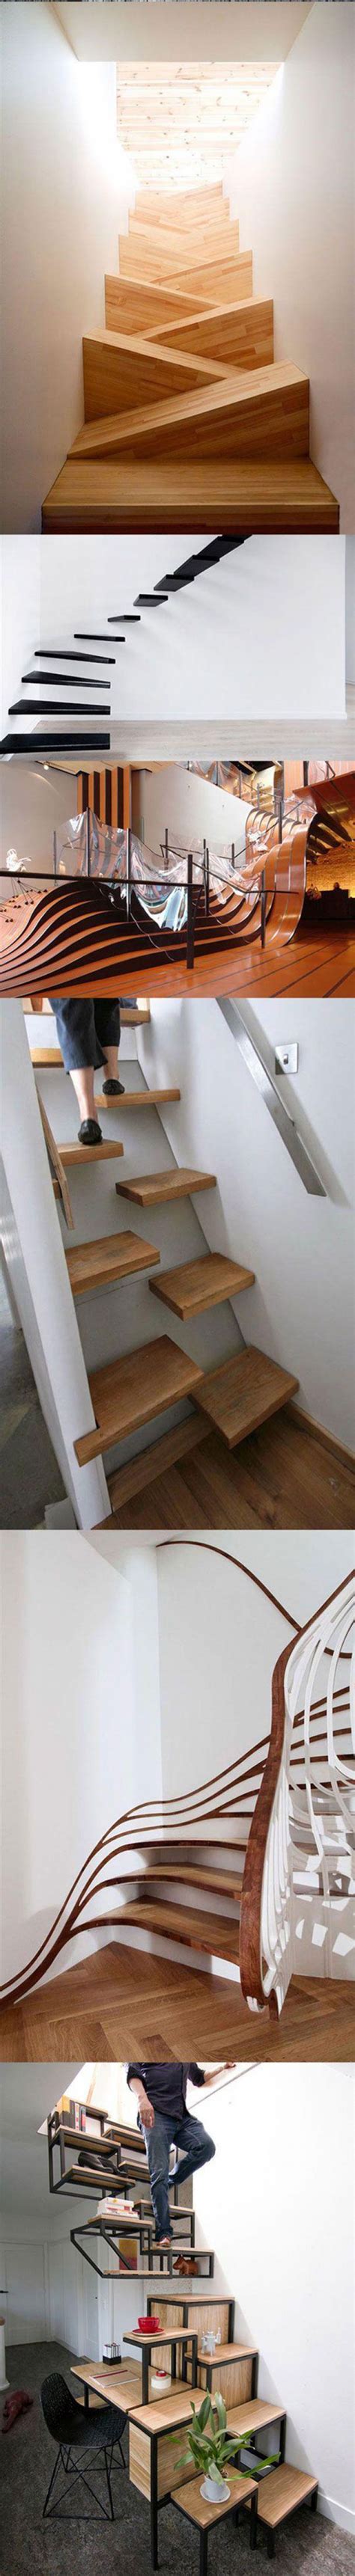 Cool Stair Designs That Will Inspire You Ladblab